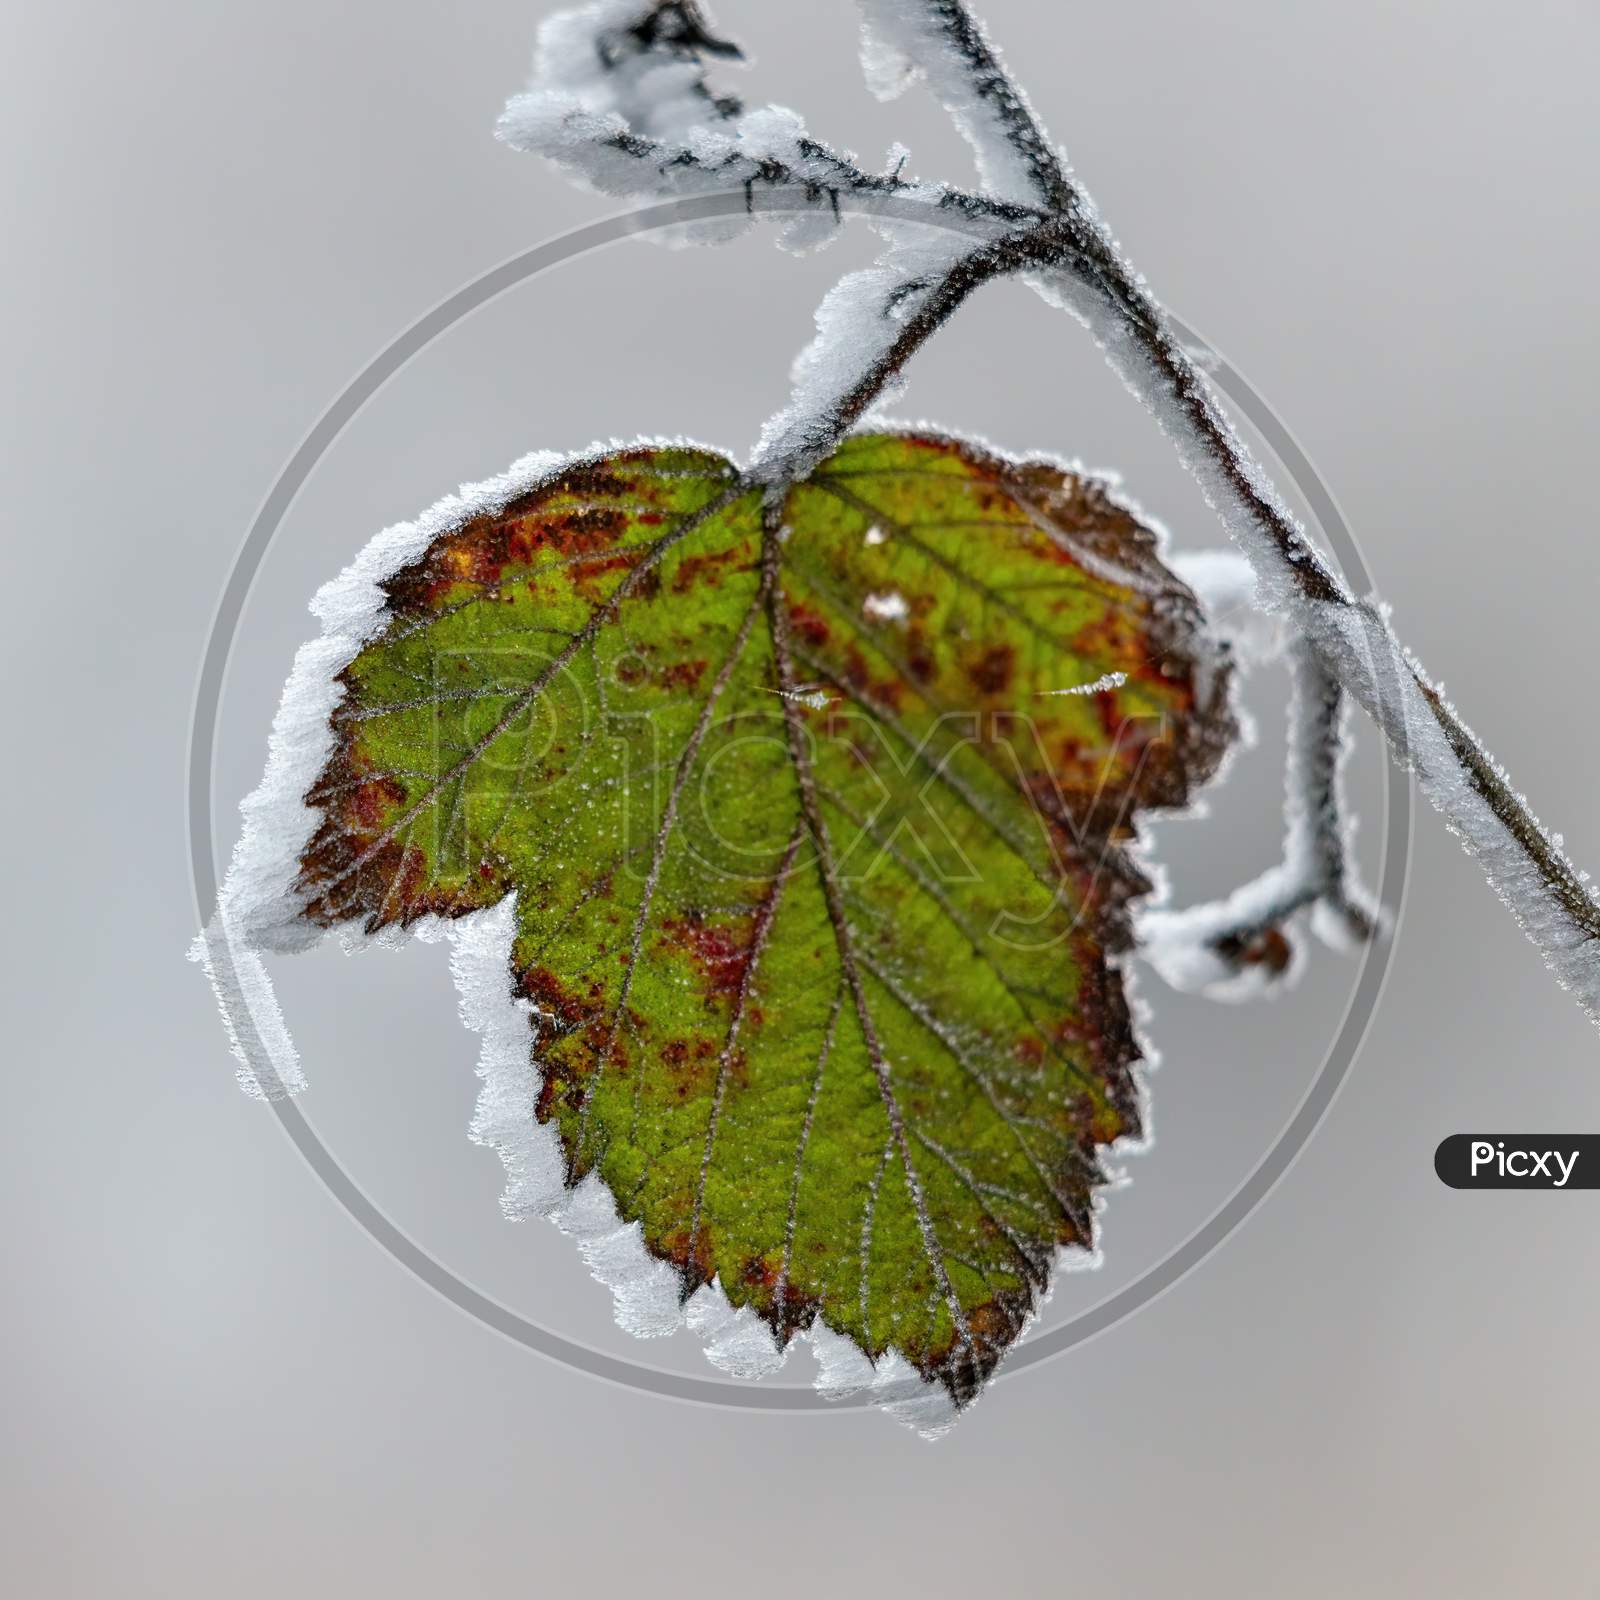 Close Up Of A Blackberry Leaf Covered With Hoar Frost